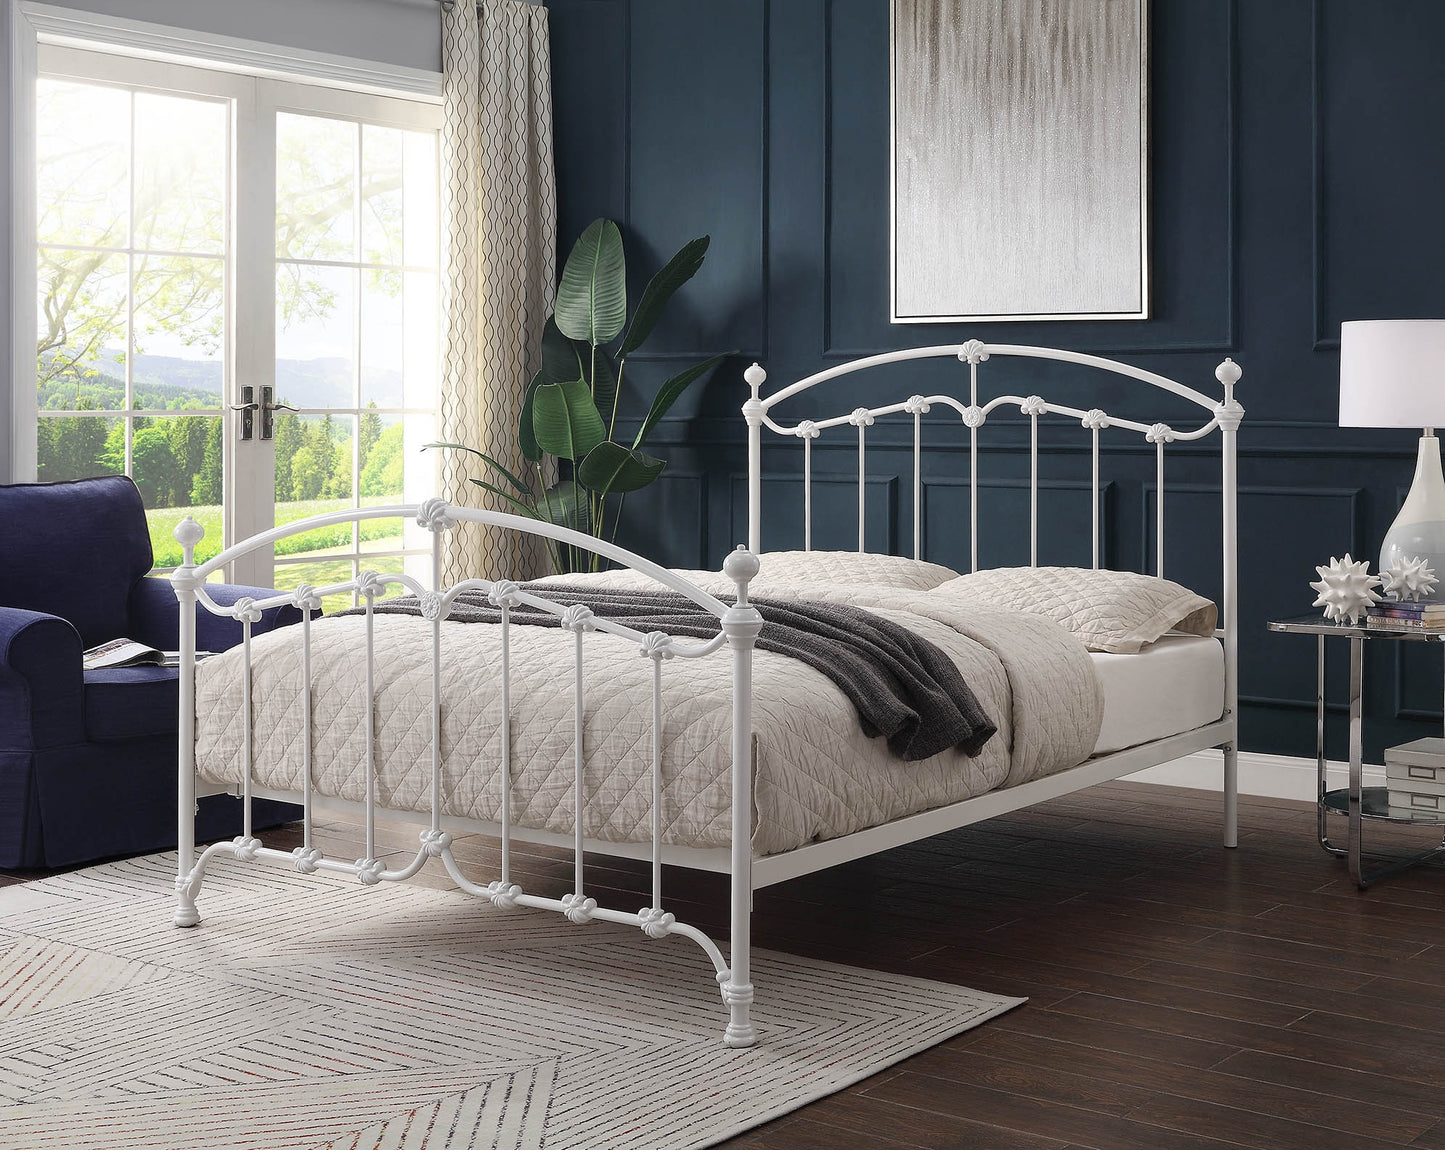 KATRINA WHITE King Single Size Cast and Wrought Iron Bed